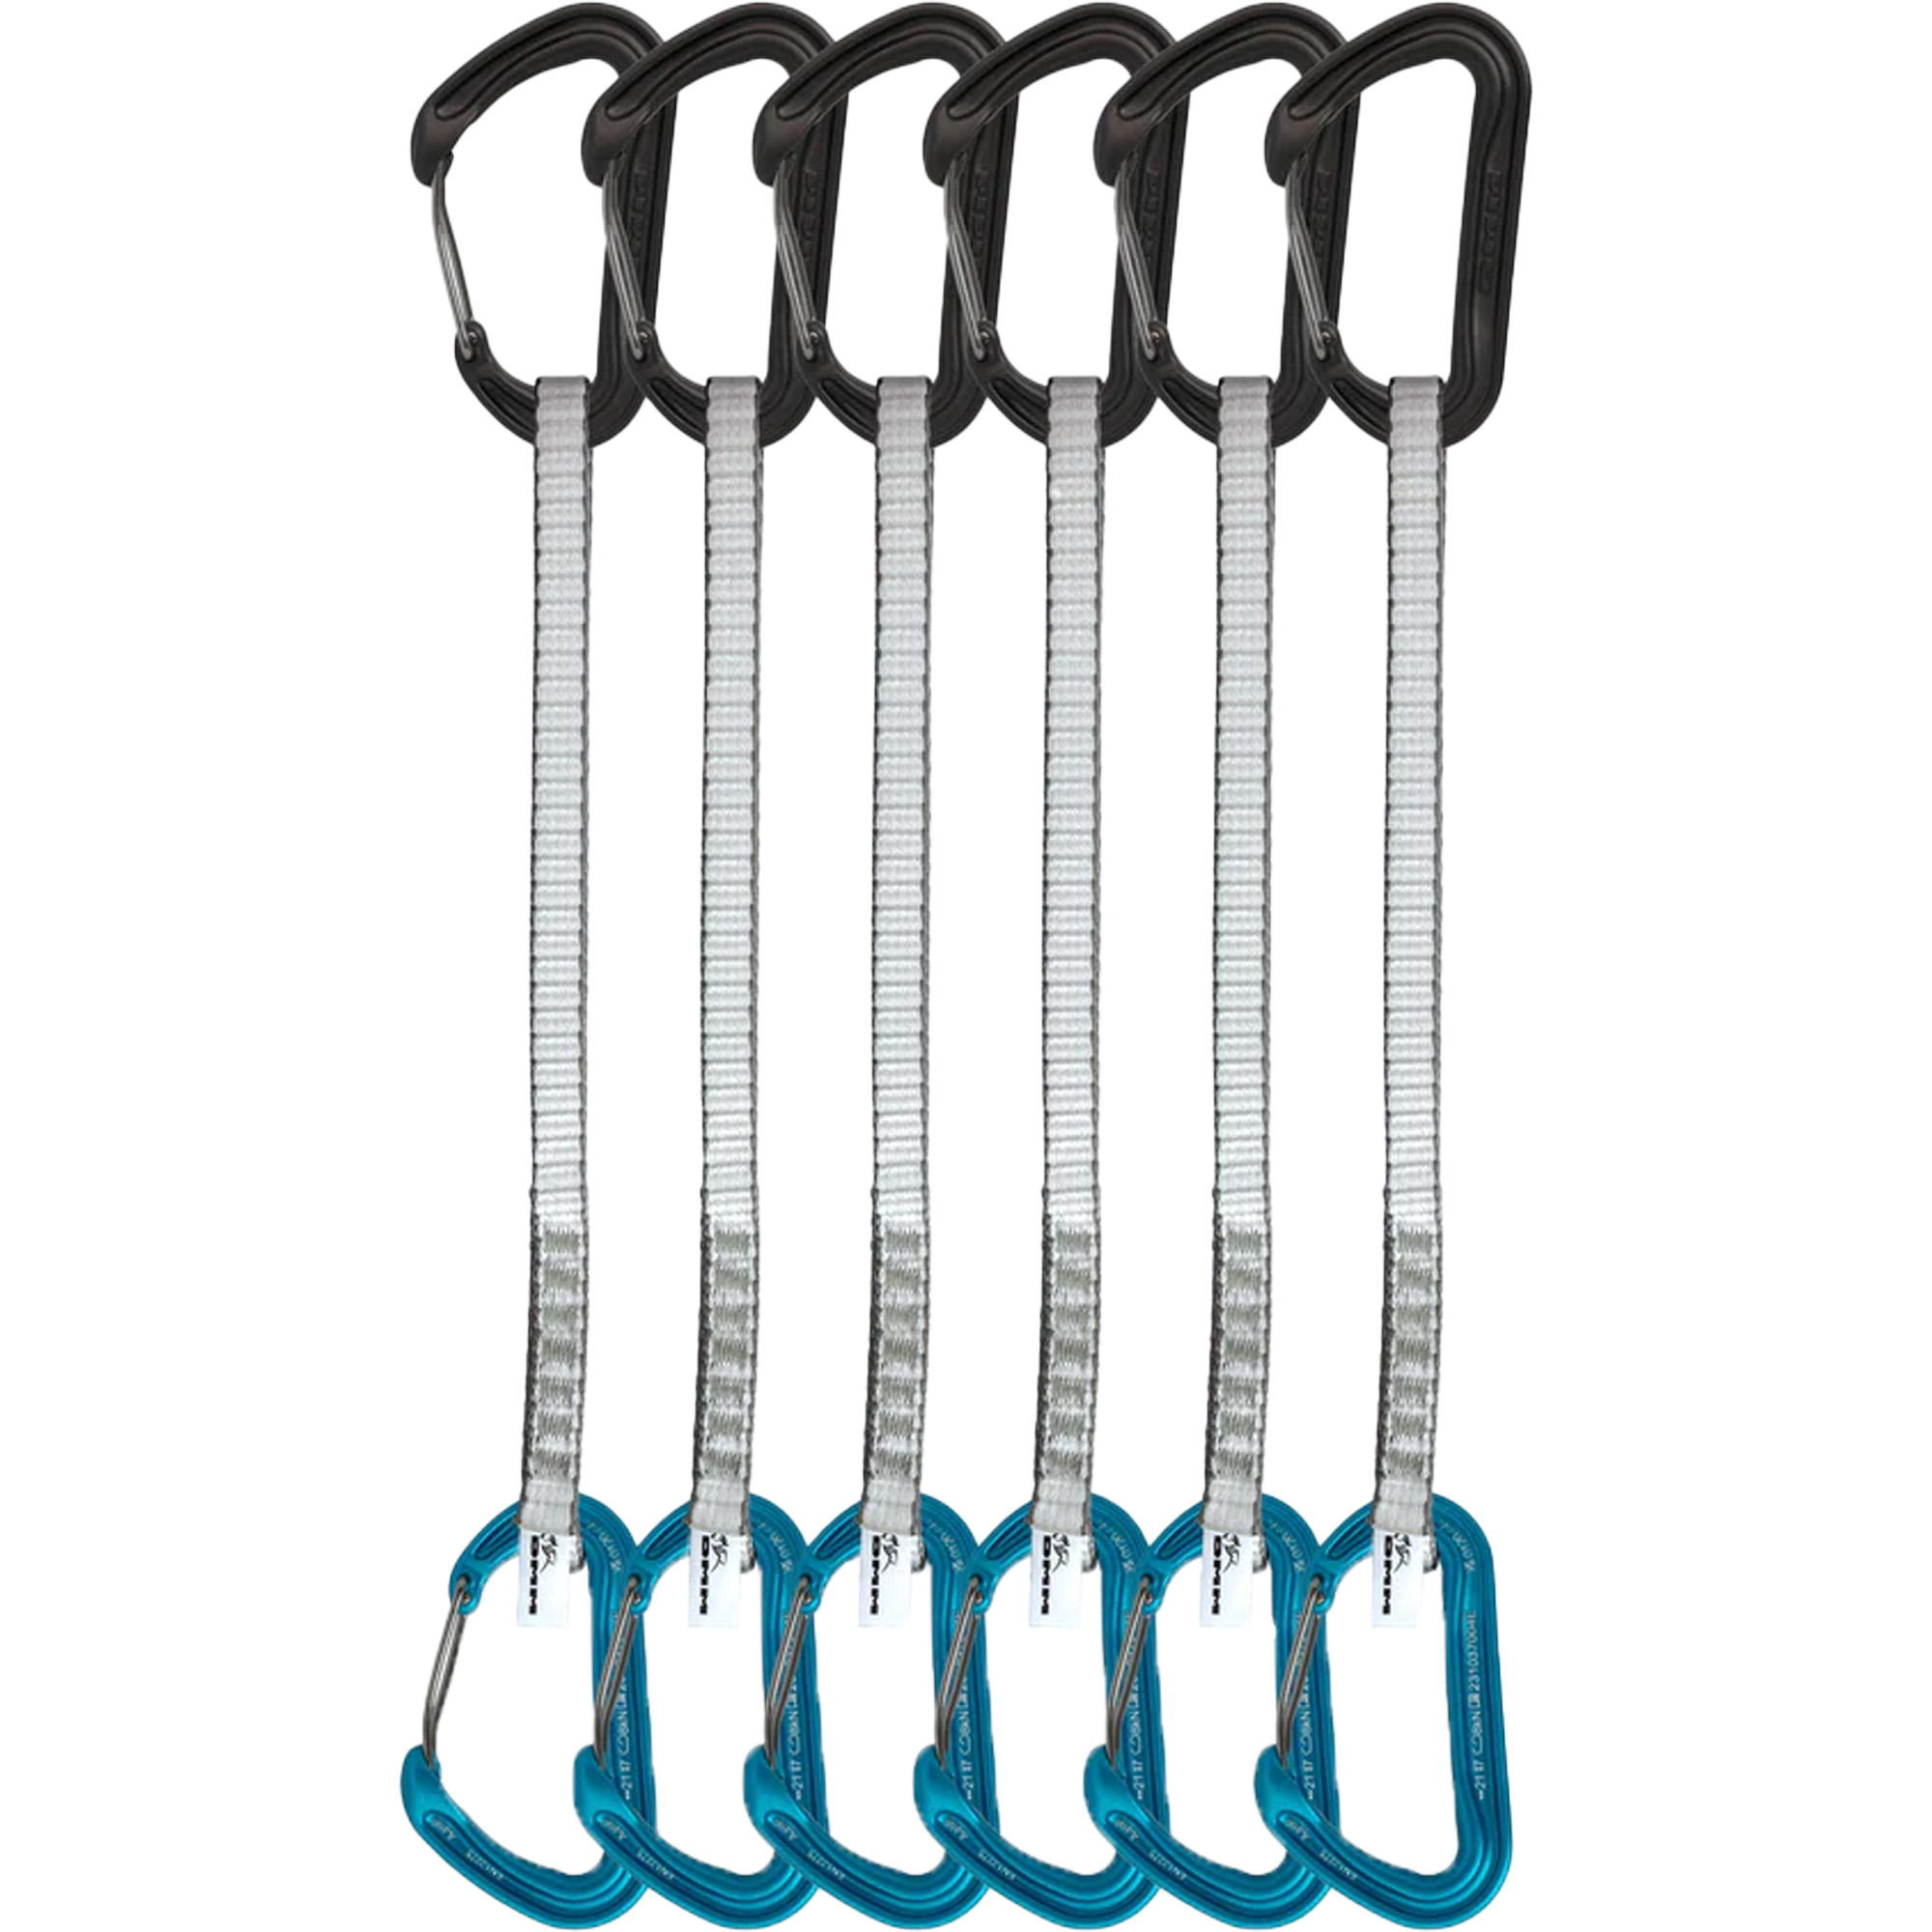 DMM Aether 25cm Rock Climbing Quickdraw 6 Pack